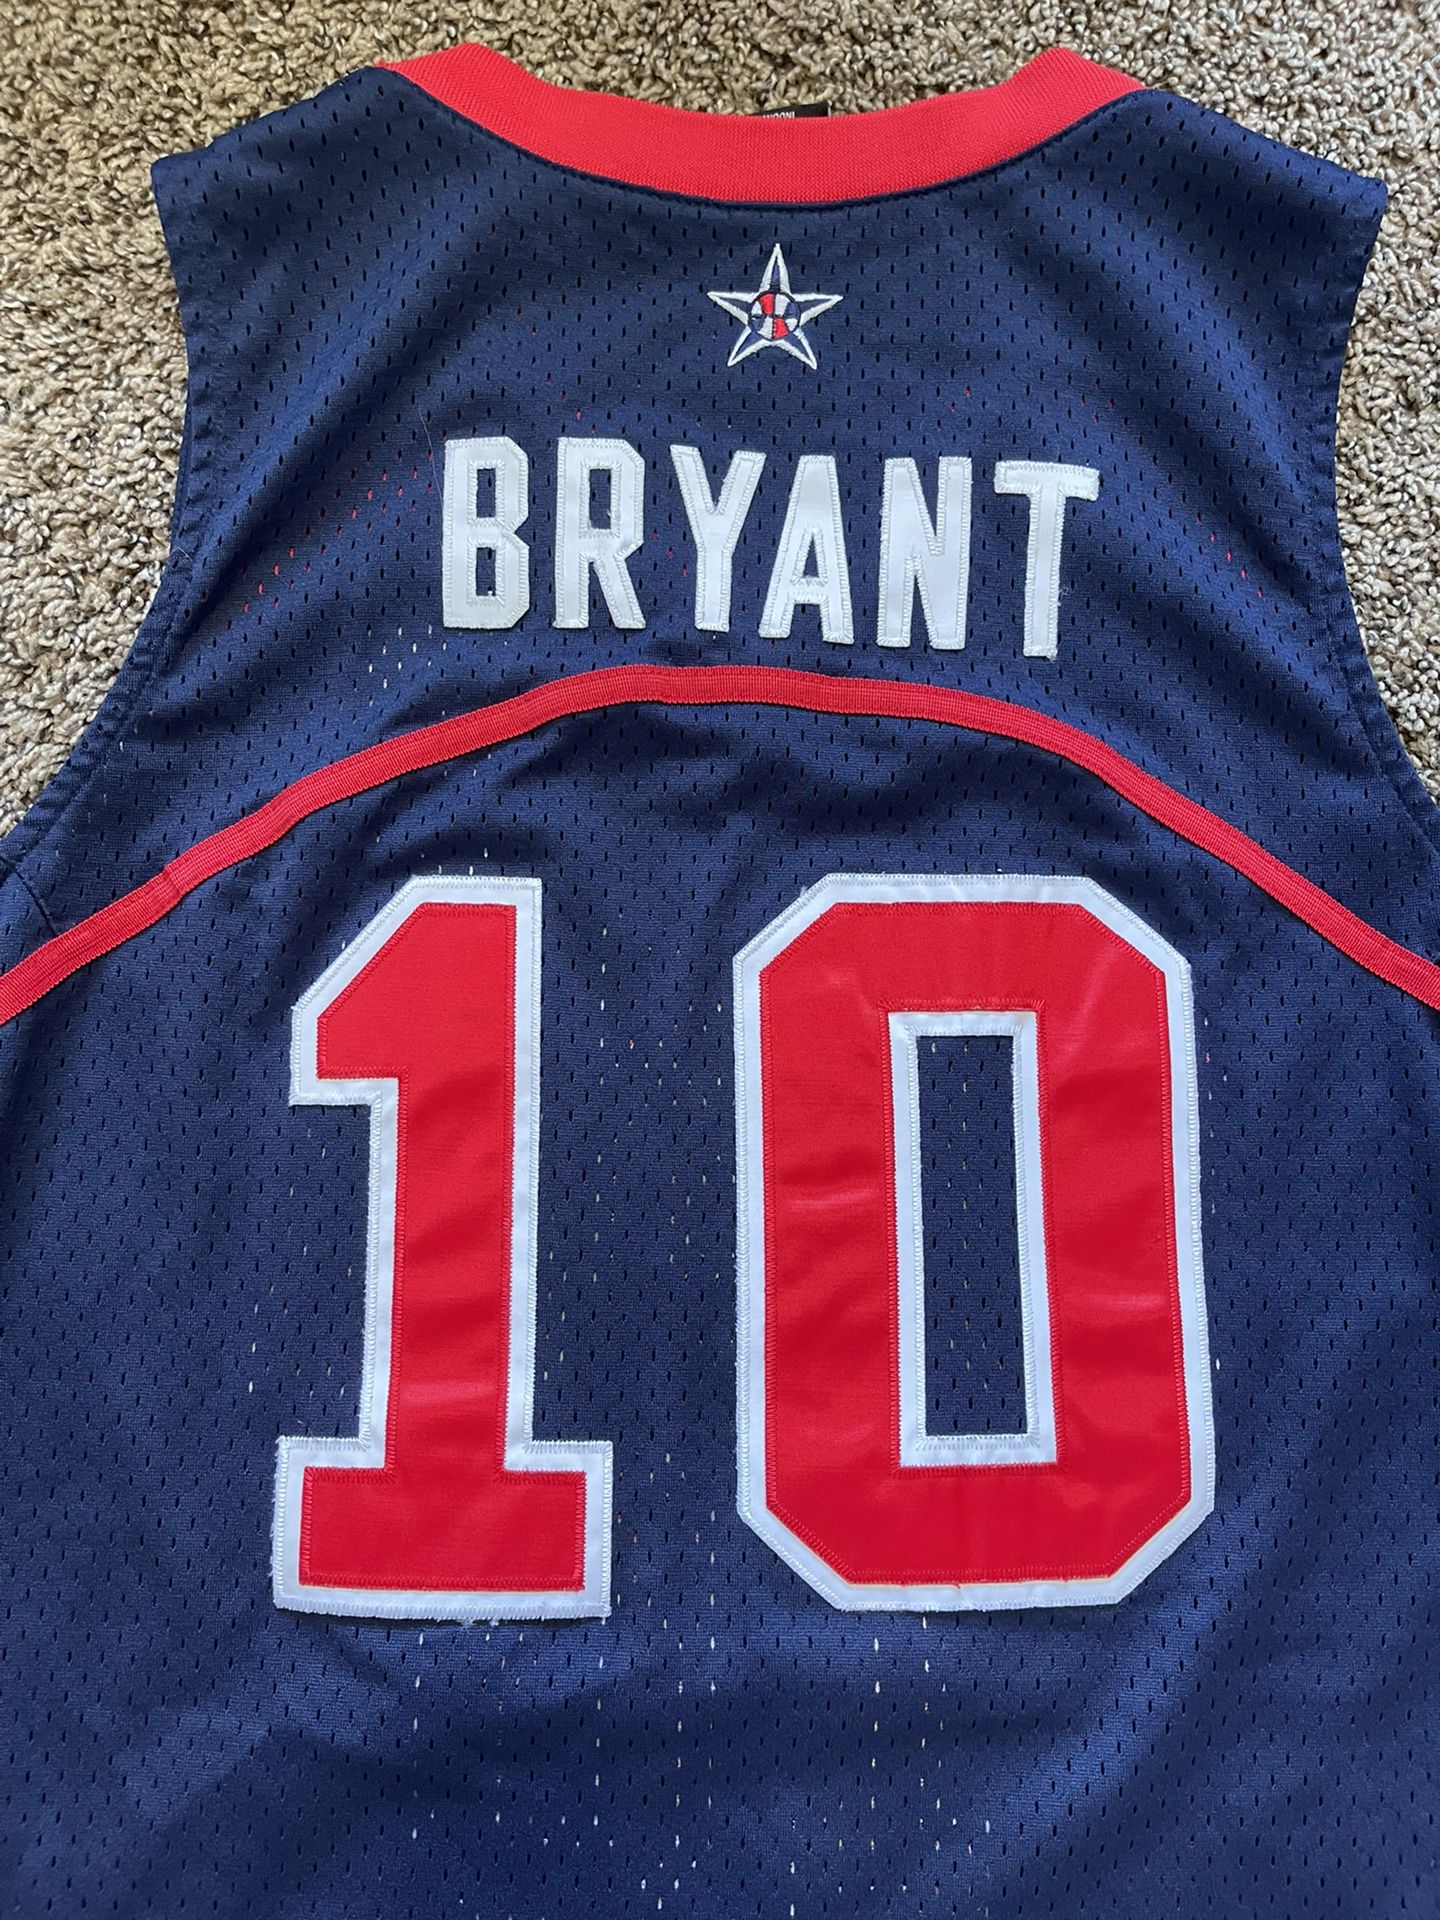 Kobe Bryant Dream Team USA Olympic Jersey #10 for Sale in Springfield, VA -  OfferUp